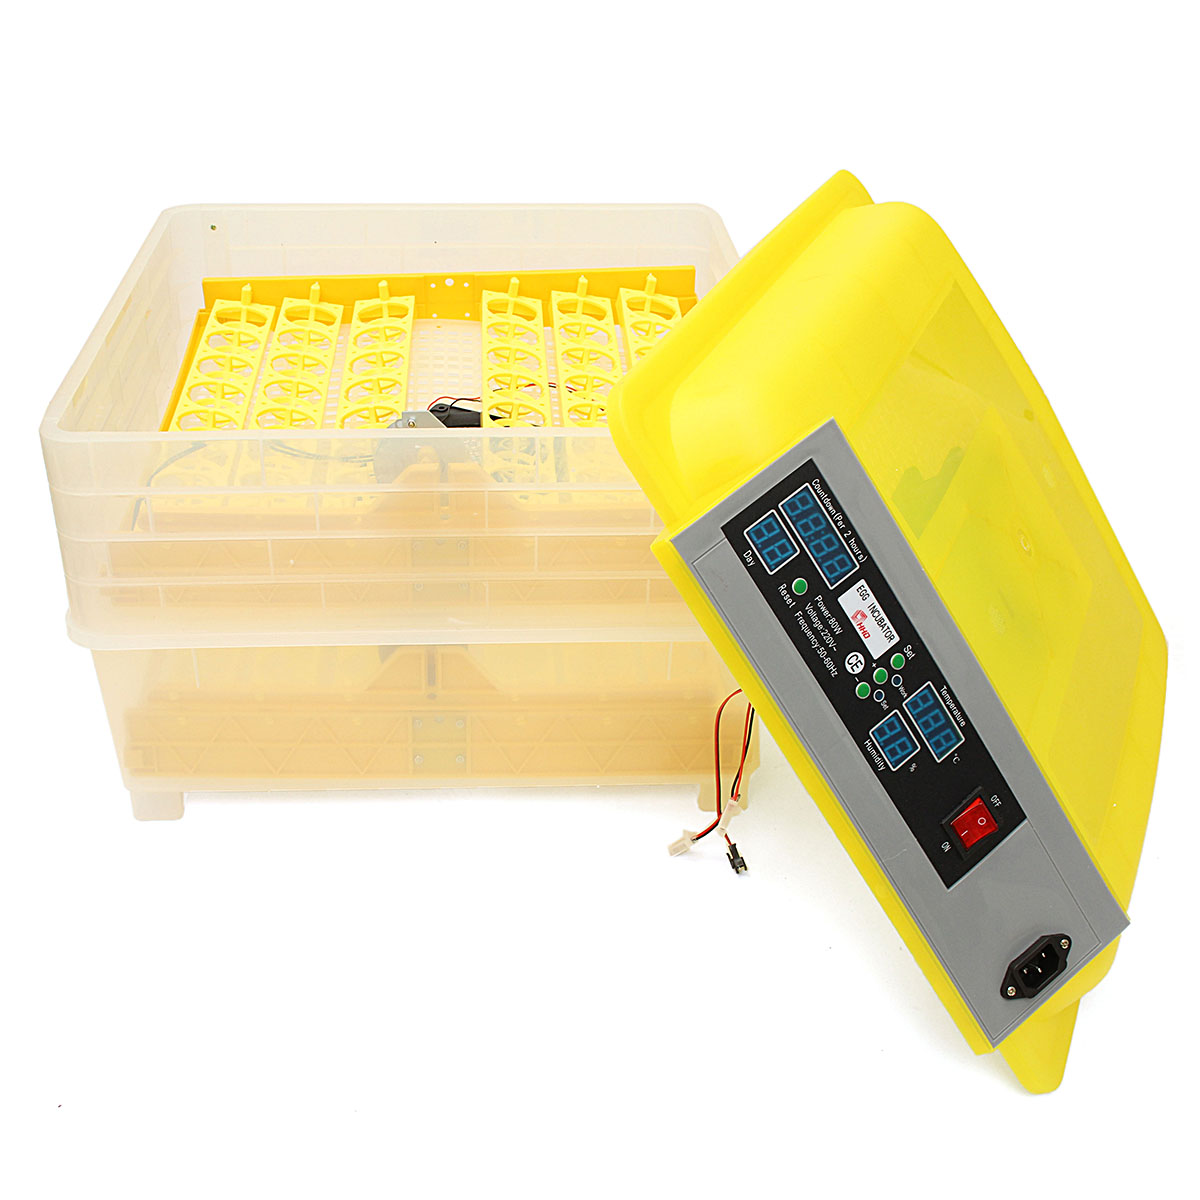 Fully-Automatic-Digital-Egg-Incubator-96-Eggs-Poultry-Duck-Hatcher-DT-110V-80W-1657249